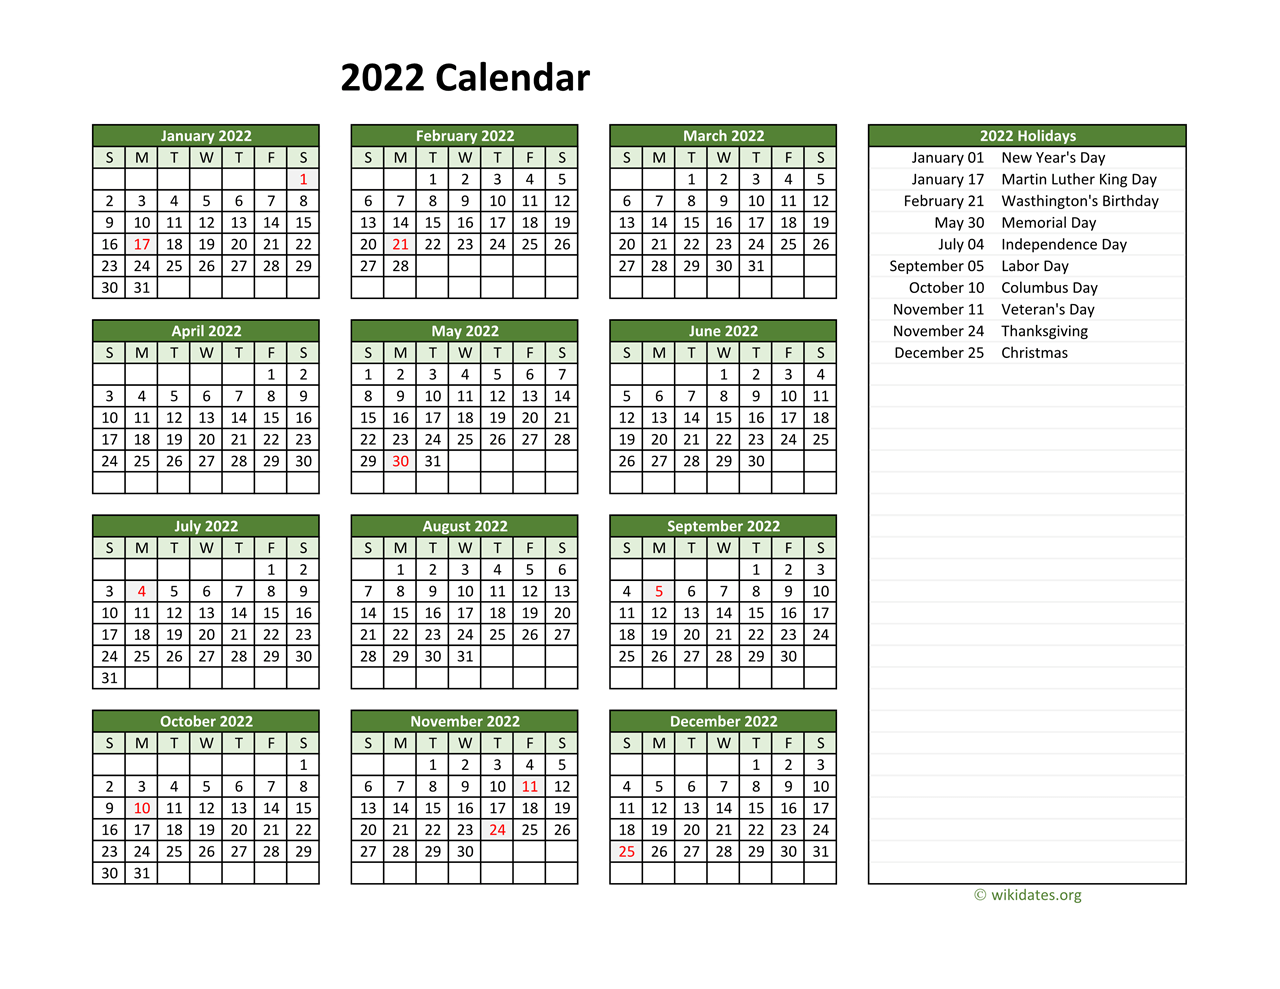 Printable 2022 Calendar With Federal Holidays | Wikidates.org